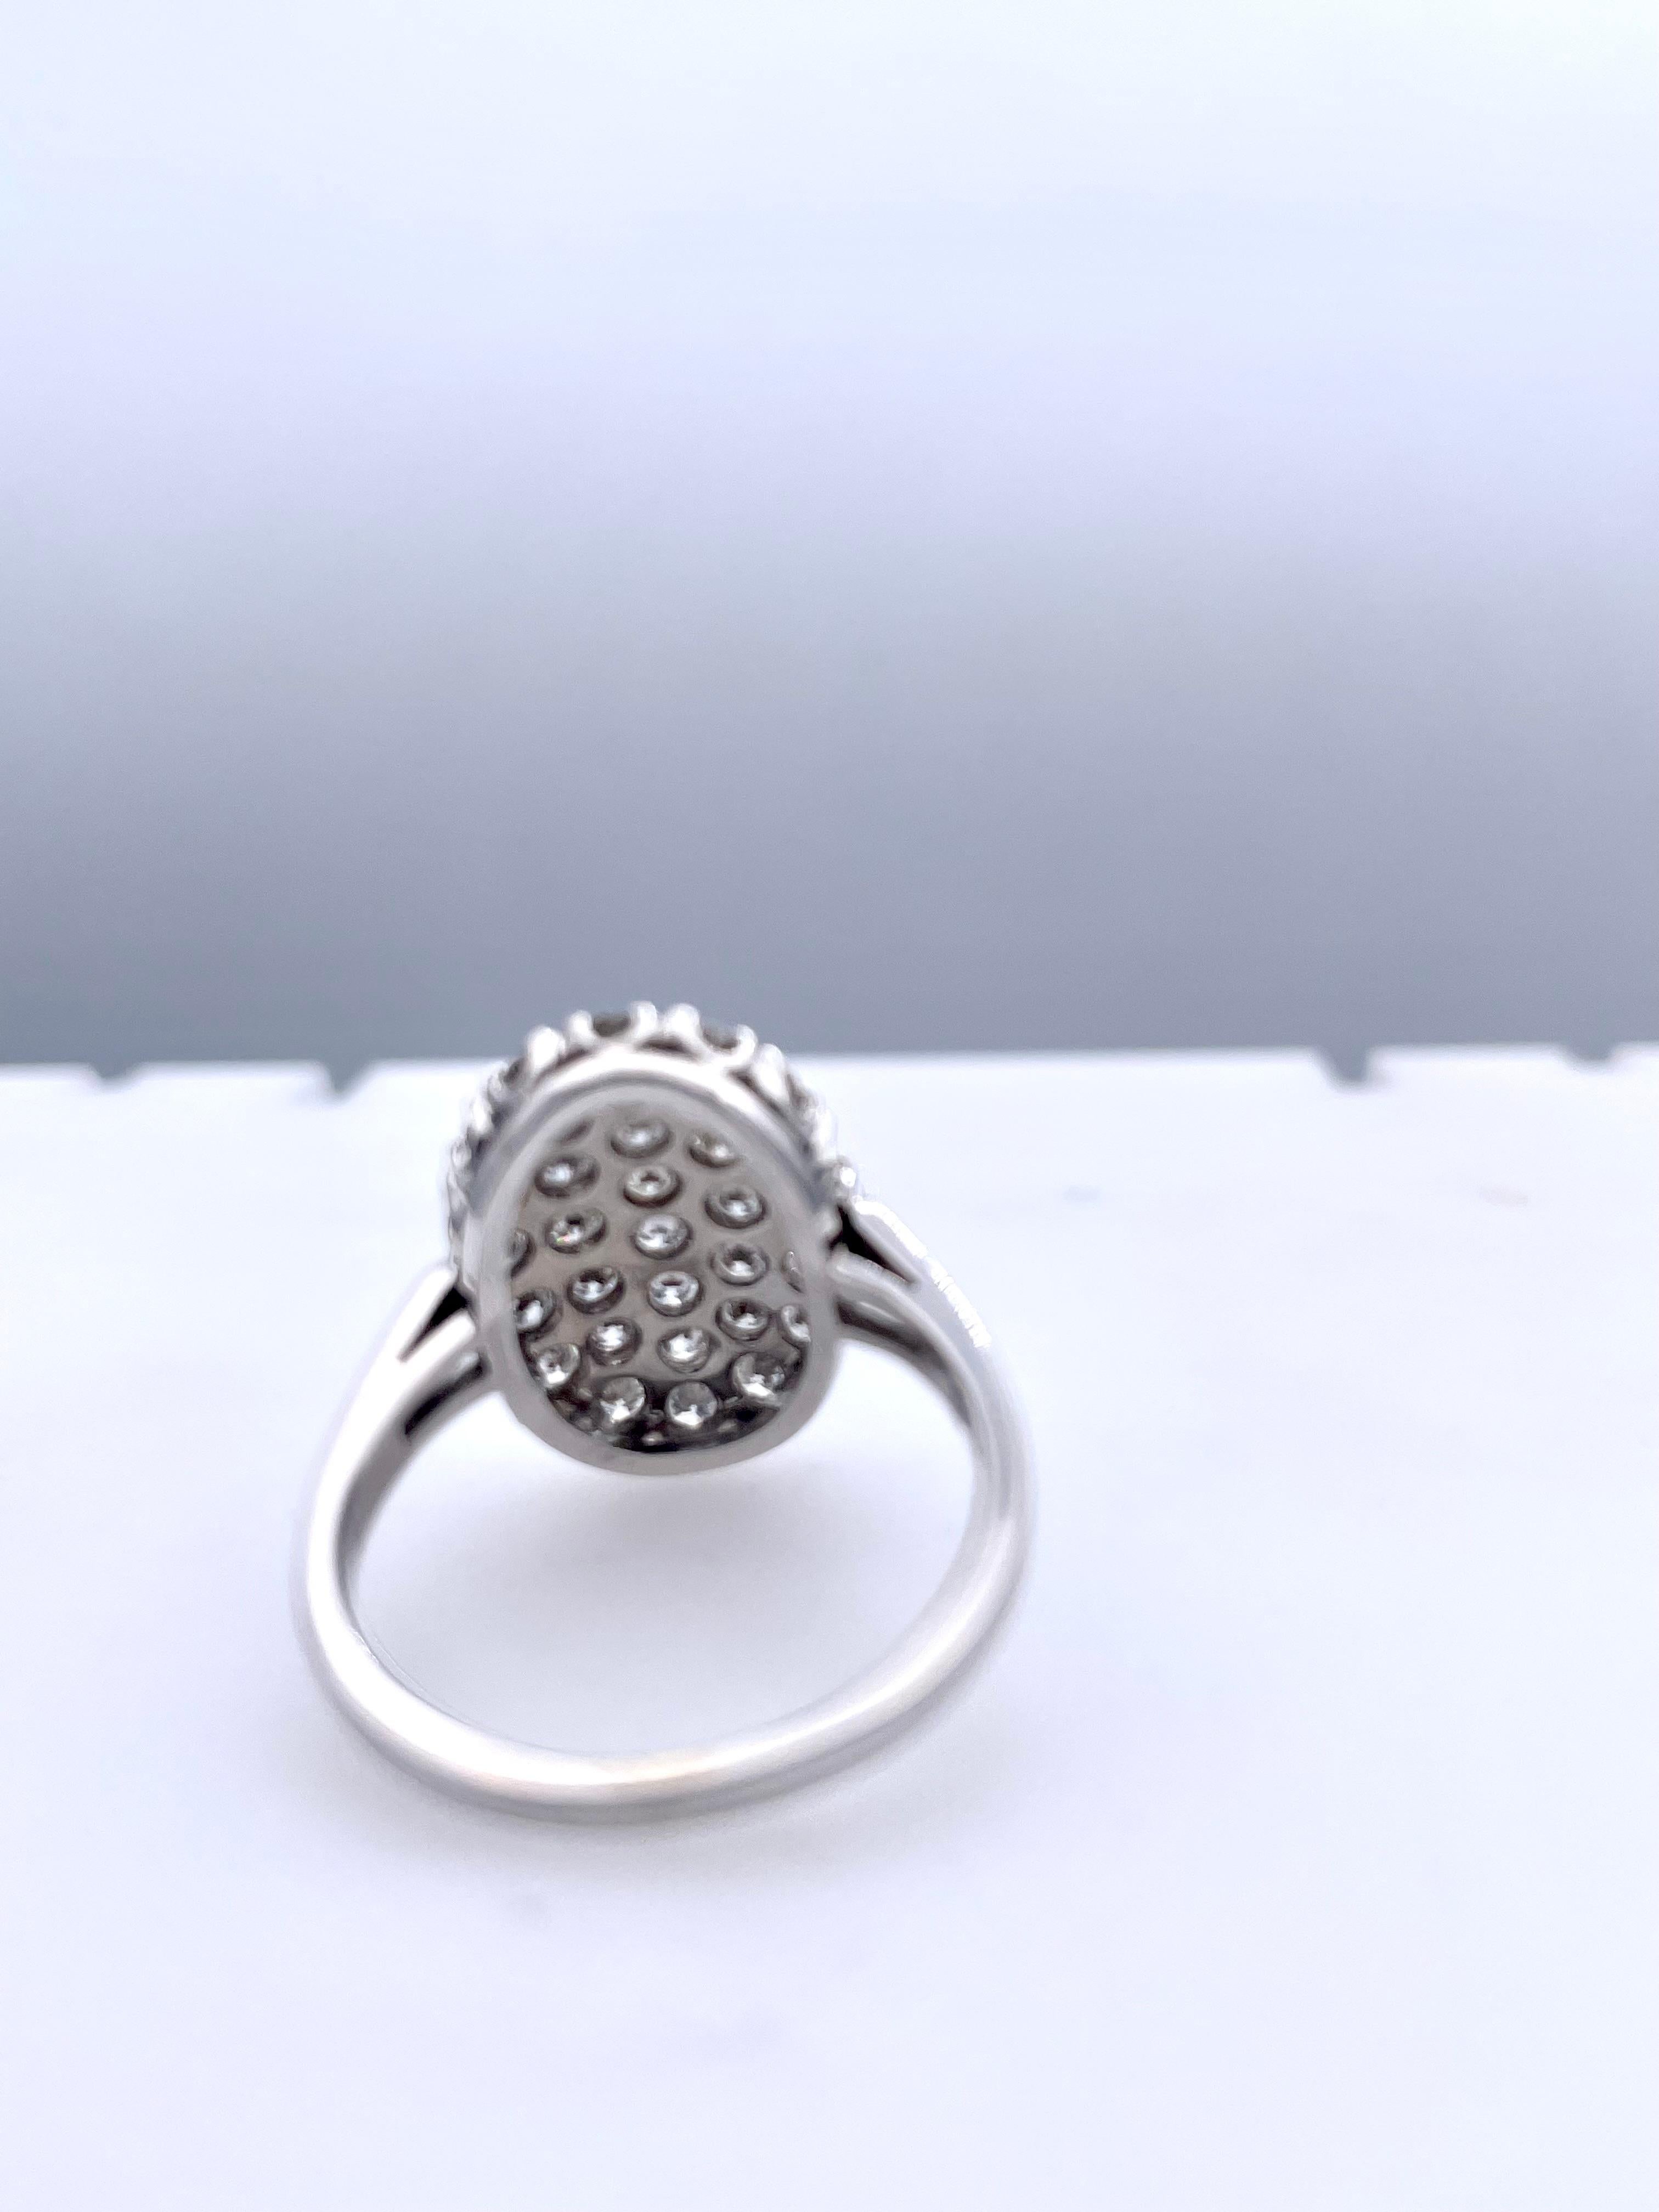 Diamond White Gold Cocktail Ring In Excellent Condition For Sale In New York, NY